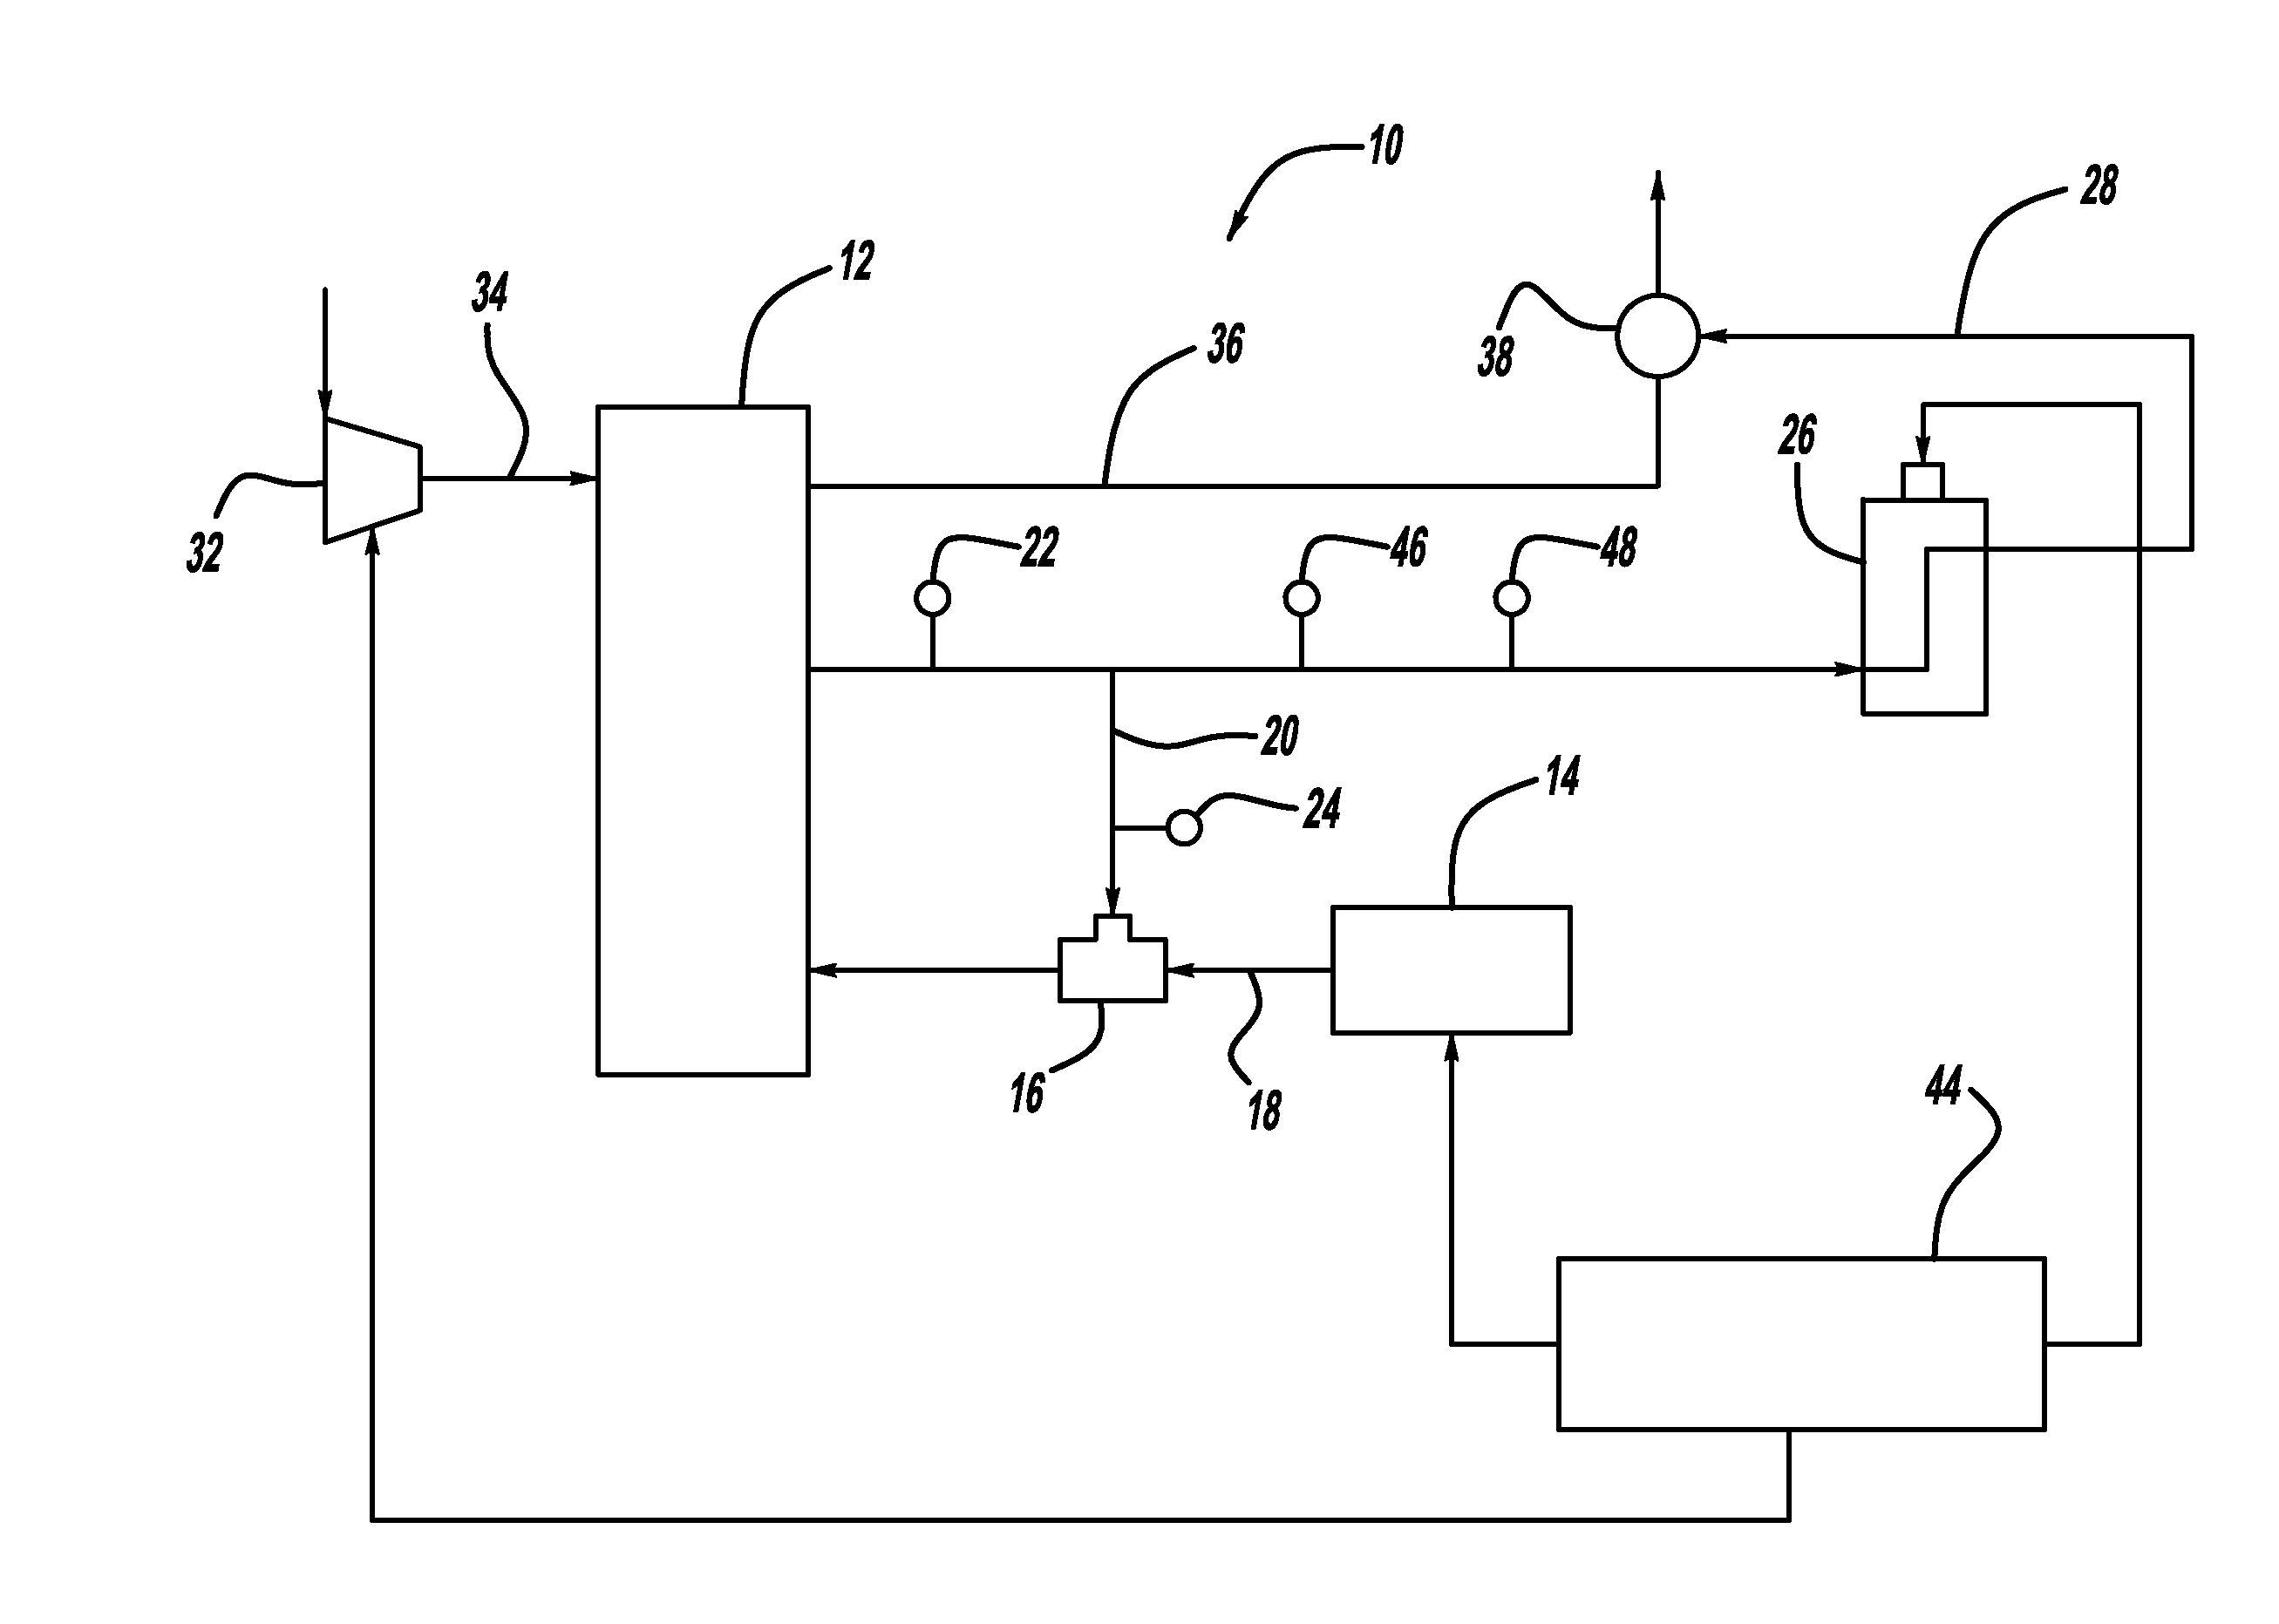 Anode gas composition utilizing h2 injection pressure wave propagation rates